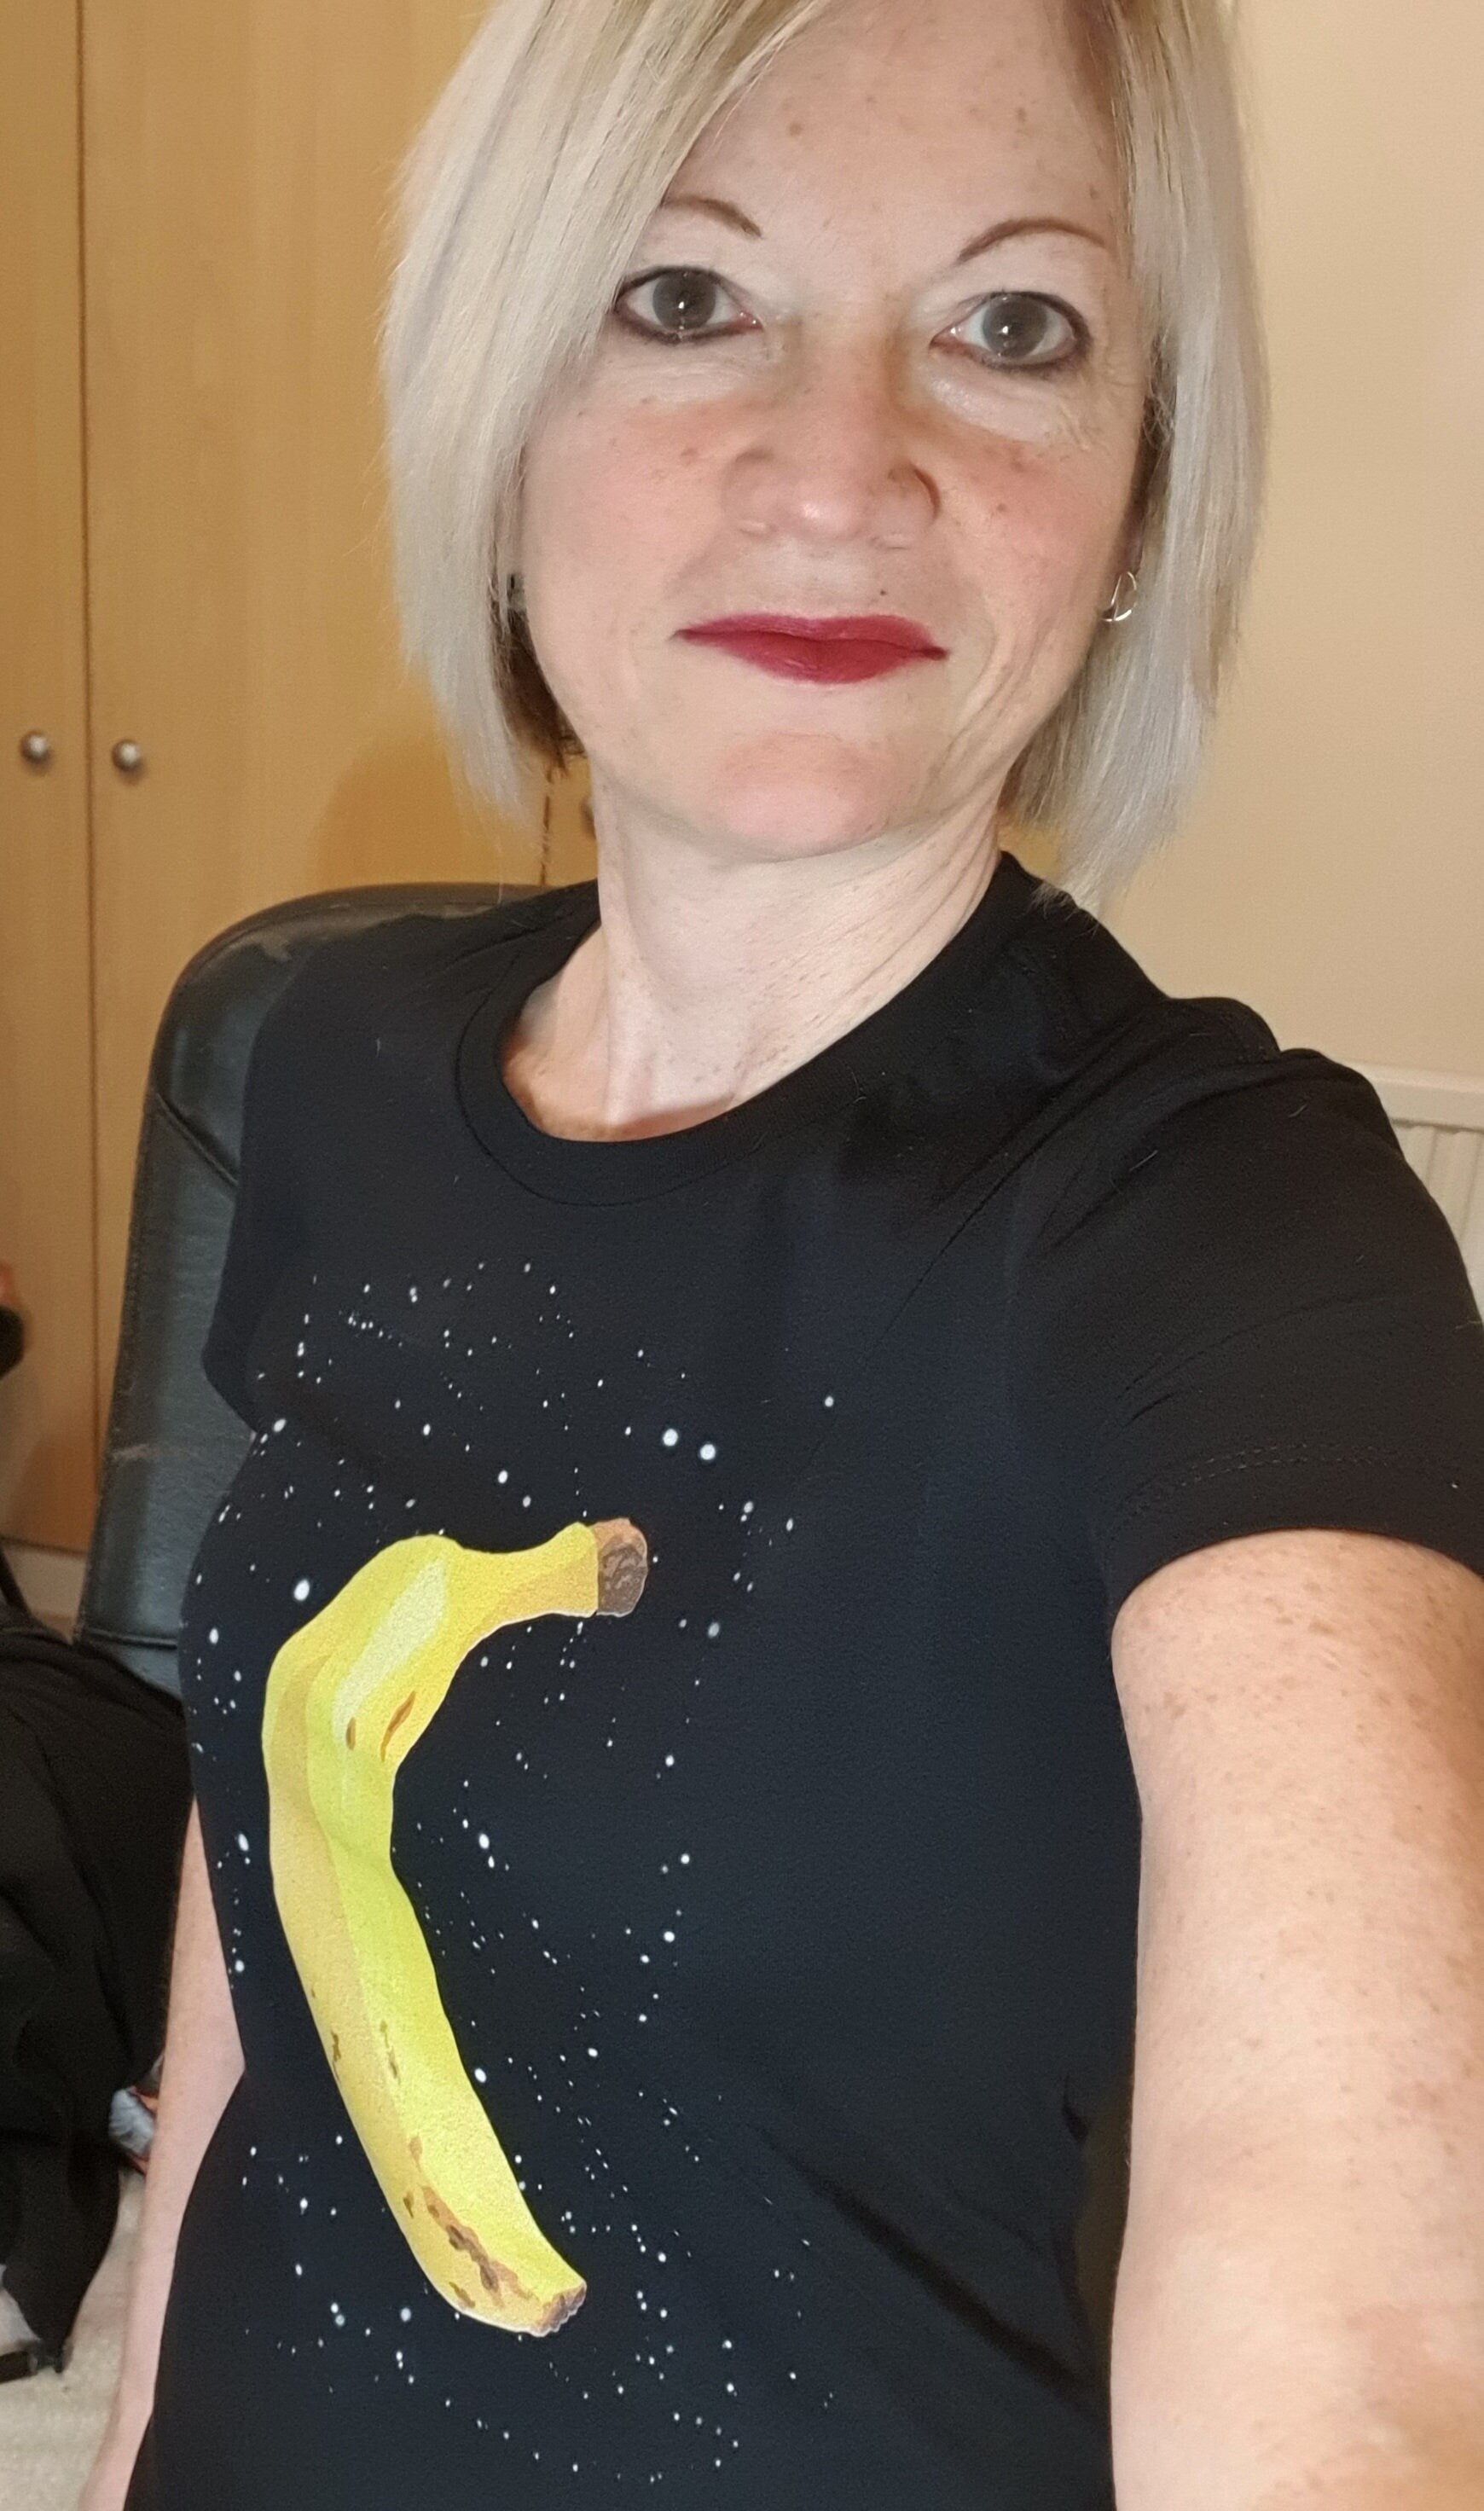 Banana in outer space T-Shirt, funny gift, outer space t-shirt, UFO t-shirt, banana tshirt, sci fi t-shirt, gift for sci fi fans, weird gift